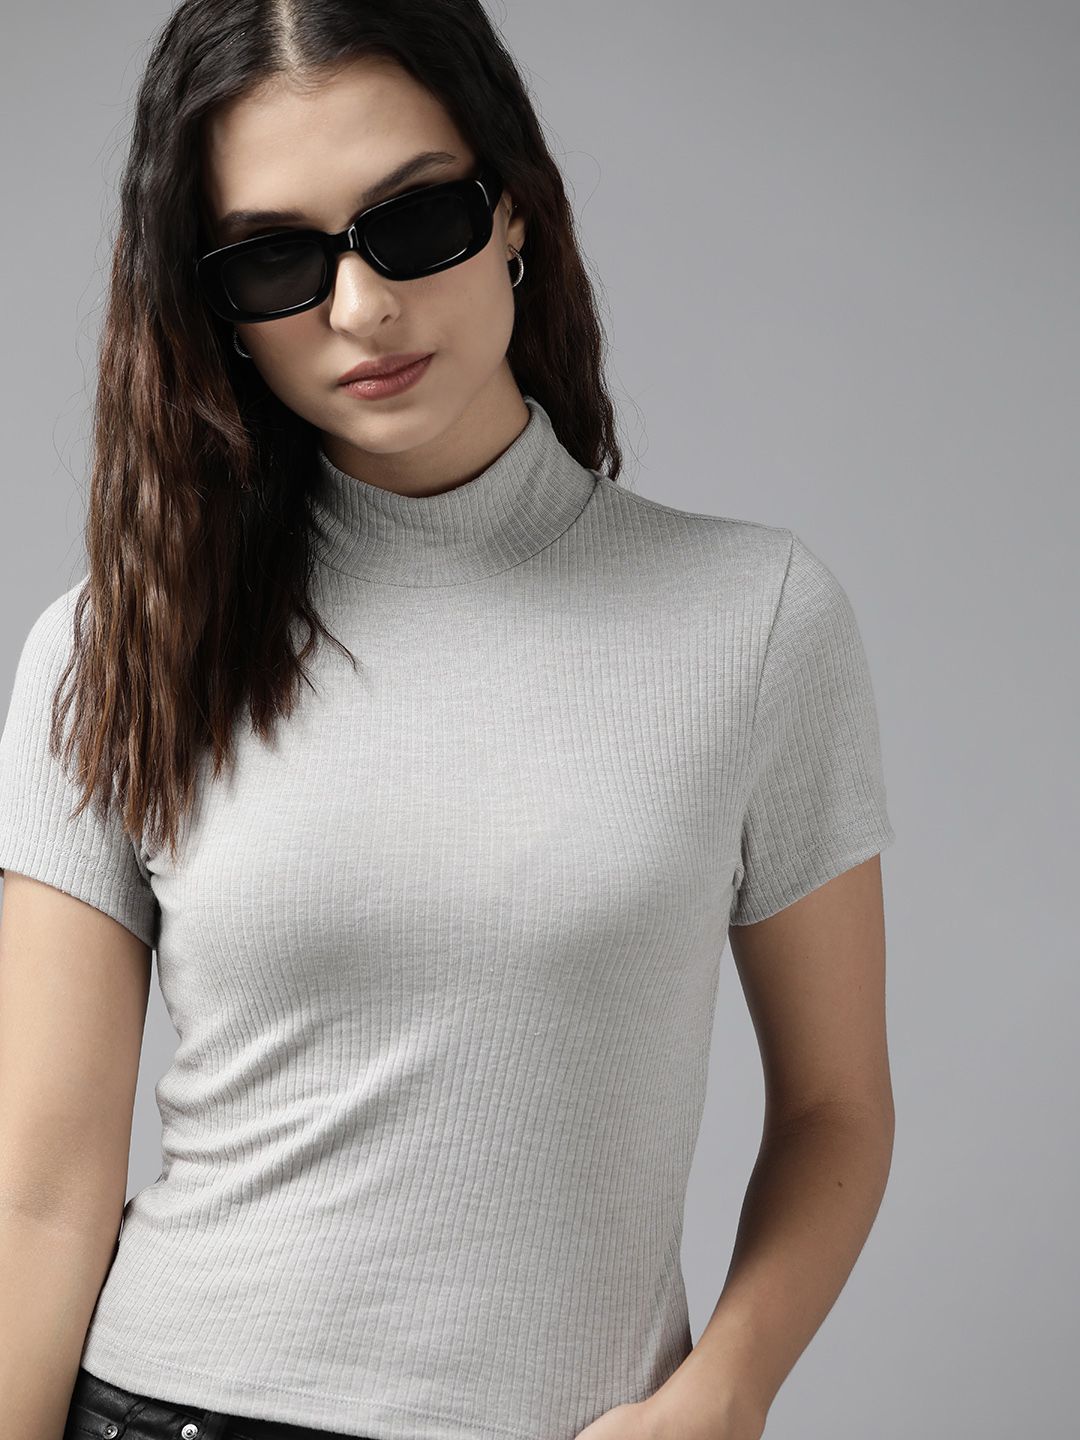 Roadster Grey High Neck Top Price in India